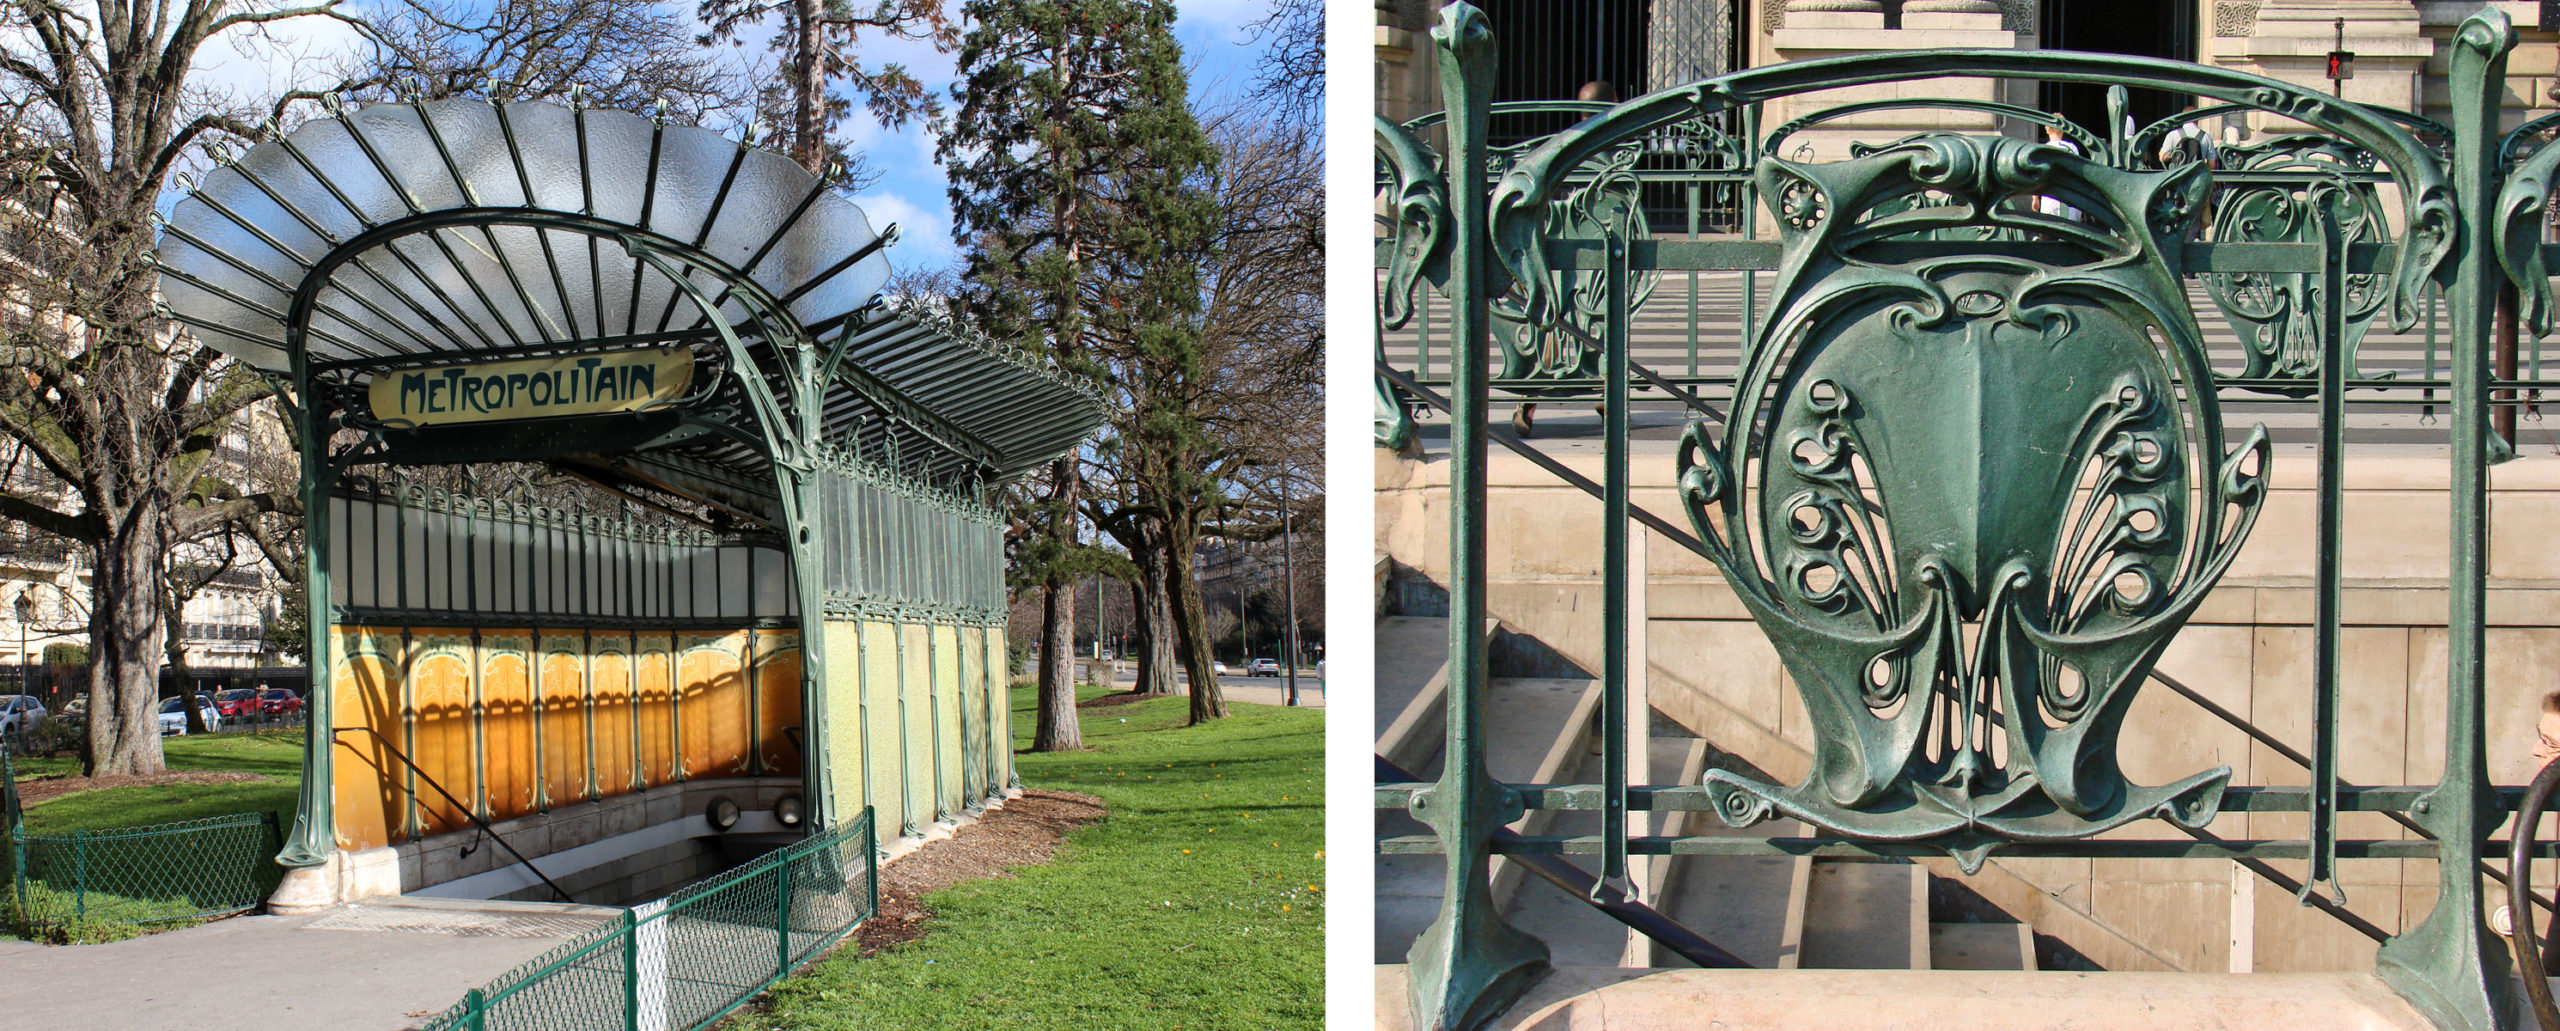 Left: Hector Guimard, Porte Dauphine, Metro entrance, 1900, Paris (photo: Chabe01, CC BY-SA 4.0); Right: Hector Guimard, Metro ironwork, detail (photo: Jean-Pierre Dalbéra, (CC BY 2.0)